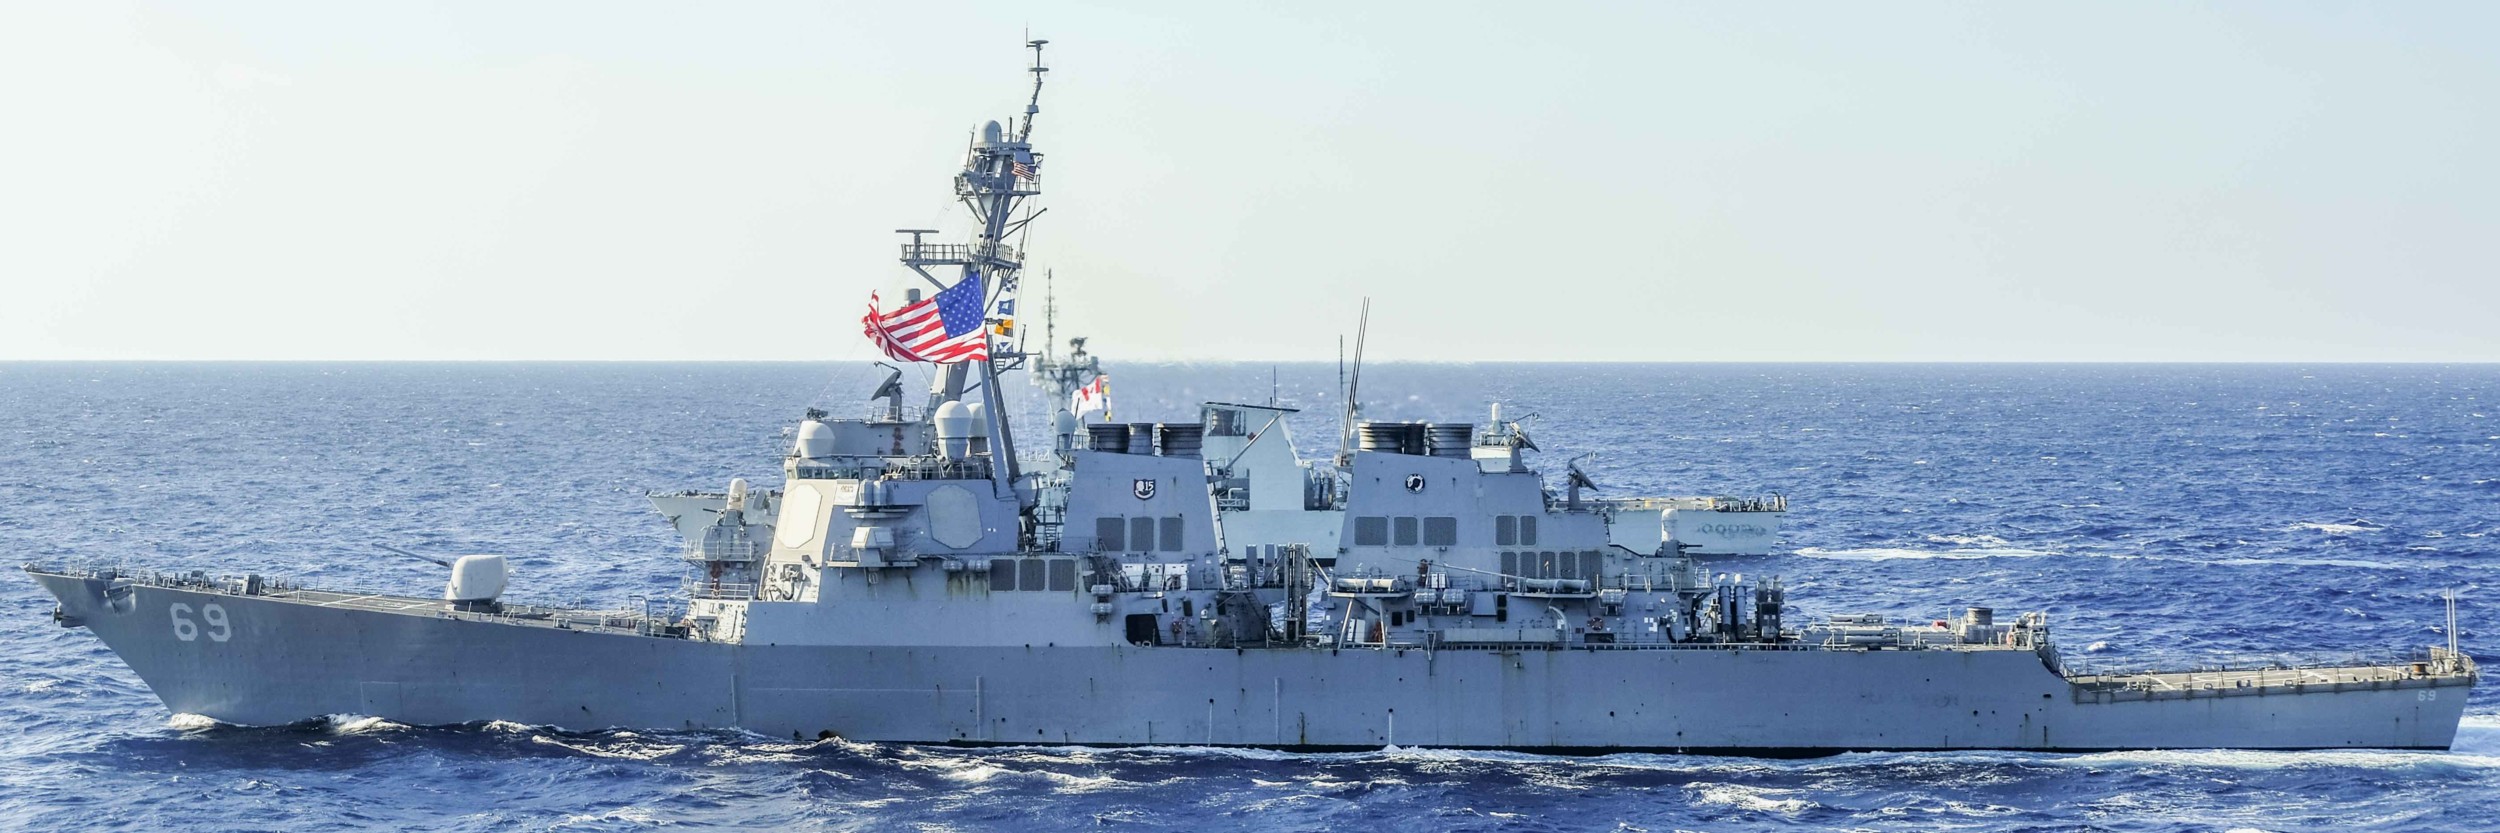 ddg-69 uss milius guided missile destroyer arleigh burke class aegis bmd 04